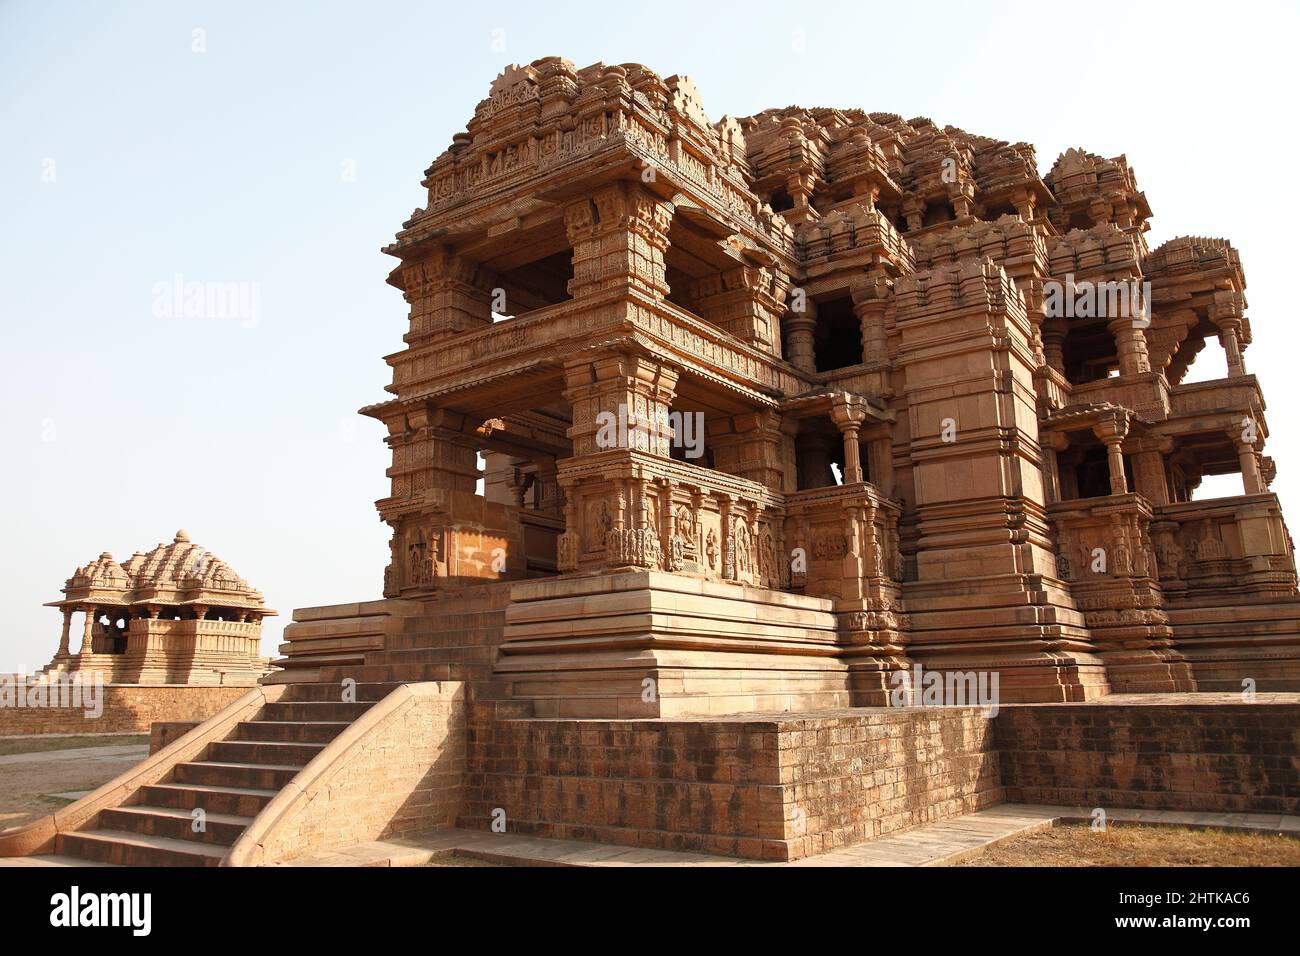 Sasbahu Temples or Mother-in-law and daughter-in-law, dating from the 11th.Century, dedicated to Vishnu and Shiva, at Gwalior in Madhya Pradesh, India Stock Photo